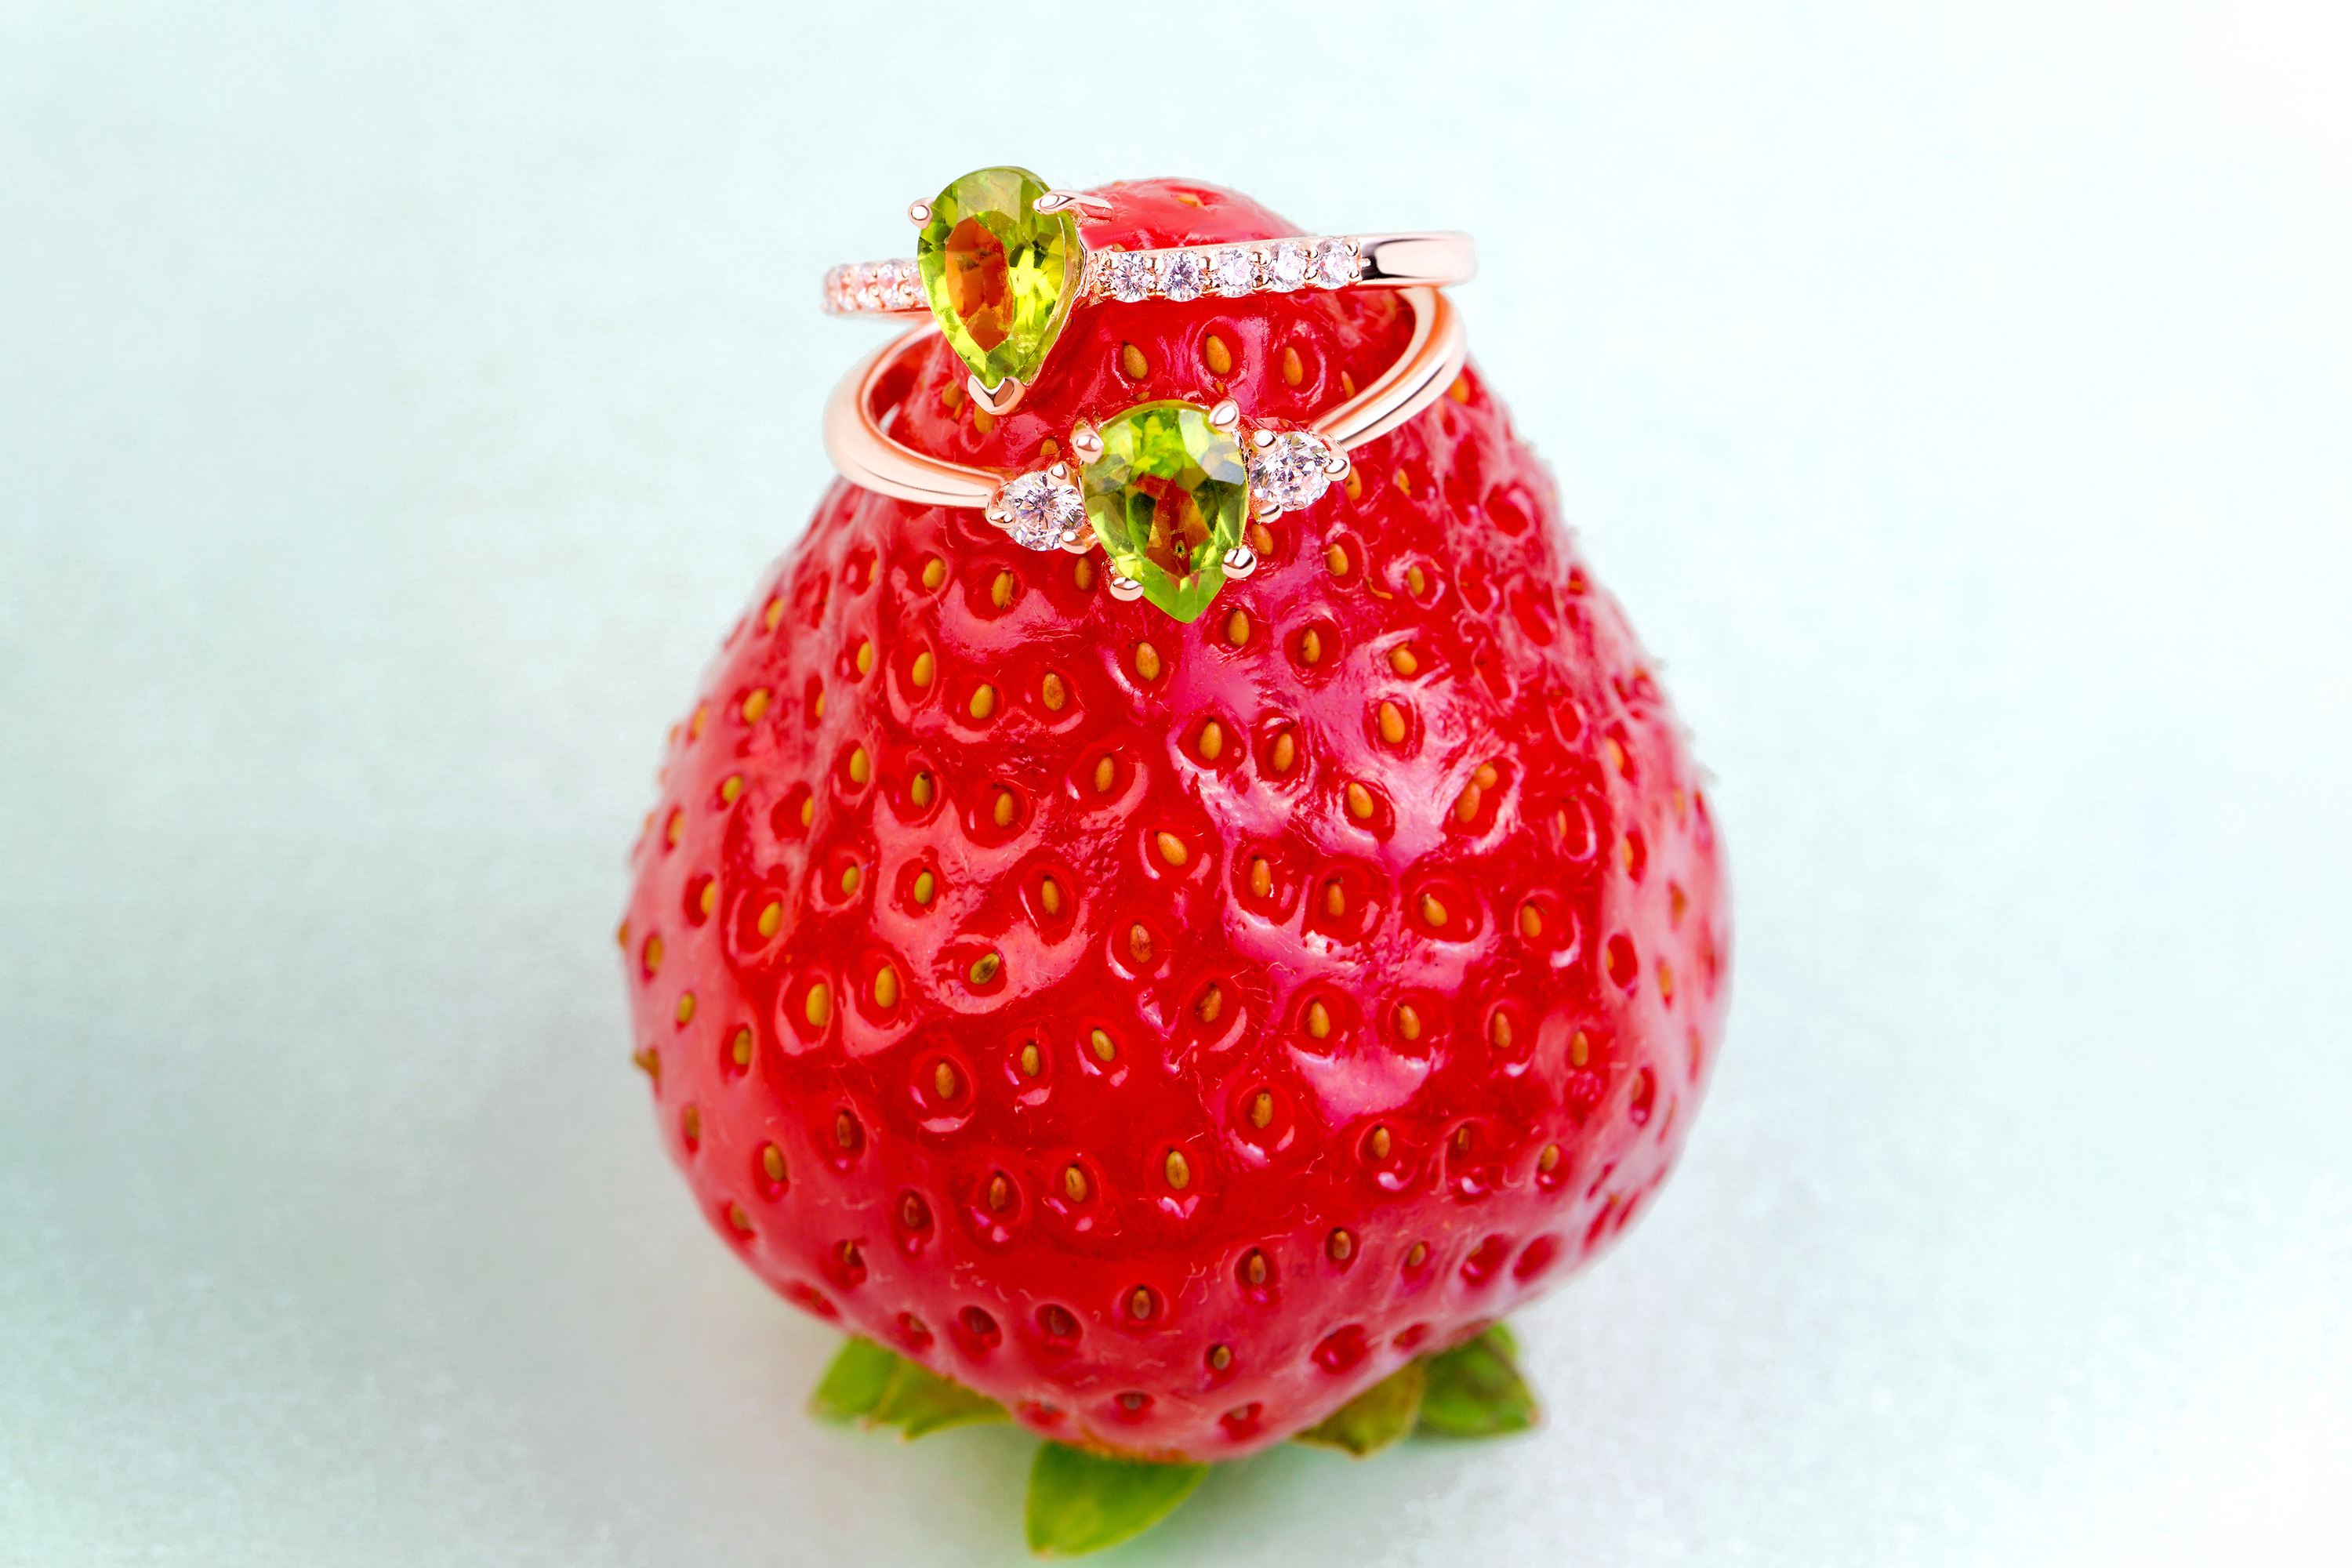 Two rings with Peridot gemstones are placed on a red strawberry.